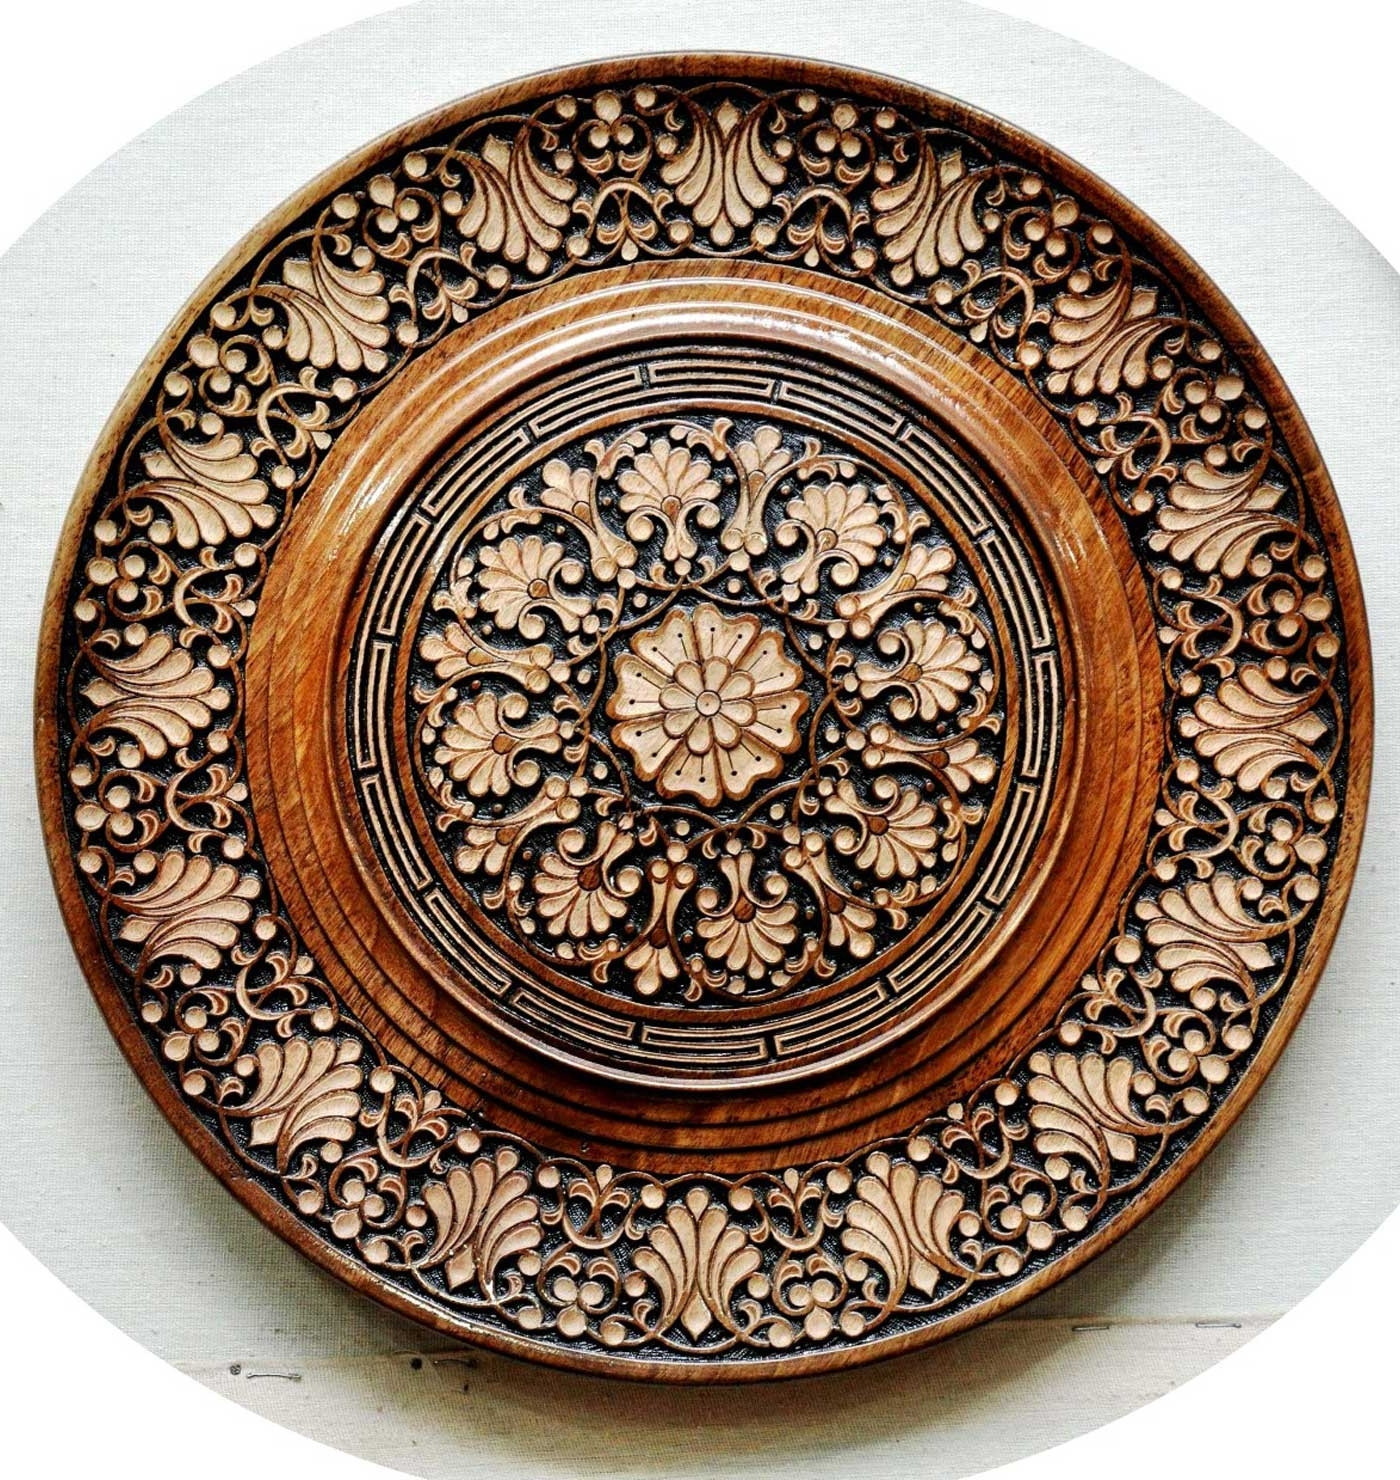 Decorative Plates For Kitchen Wall
 15 s Decorative Plates For Wall Art